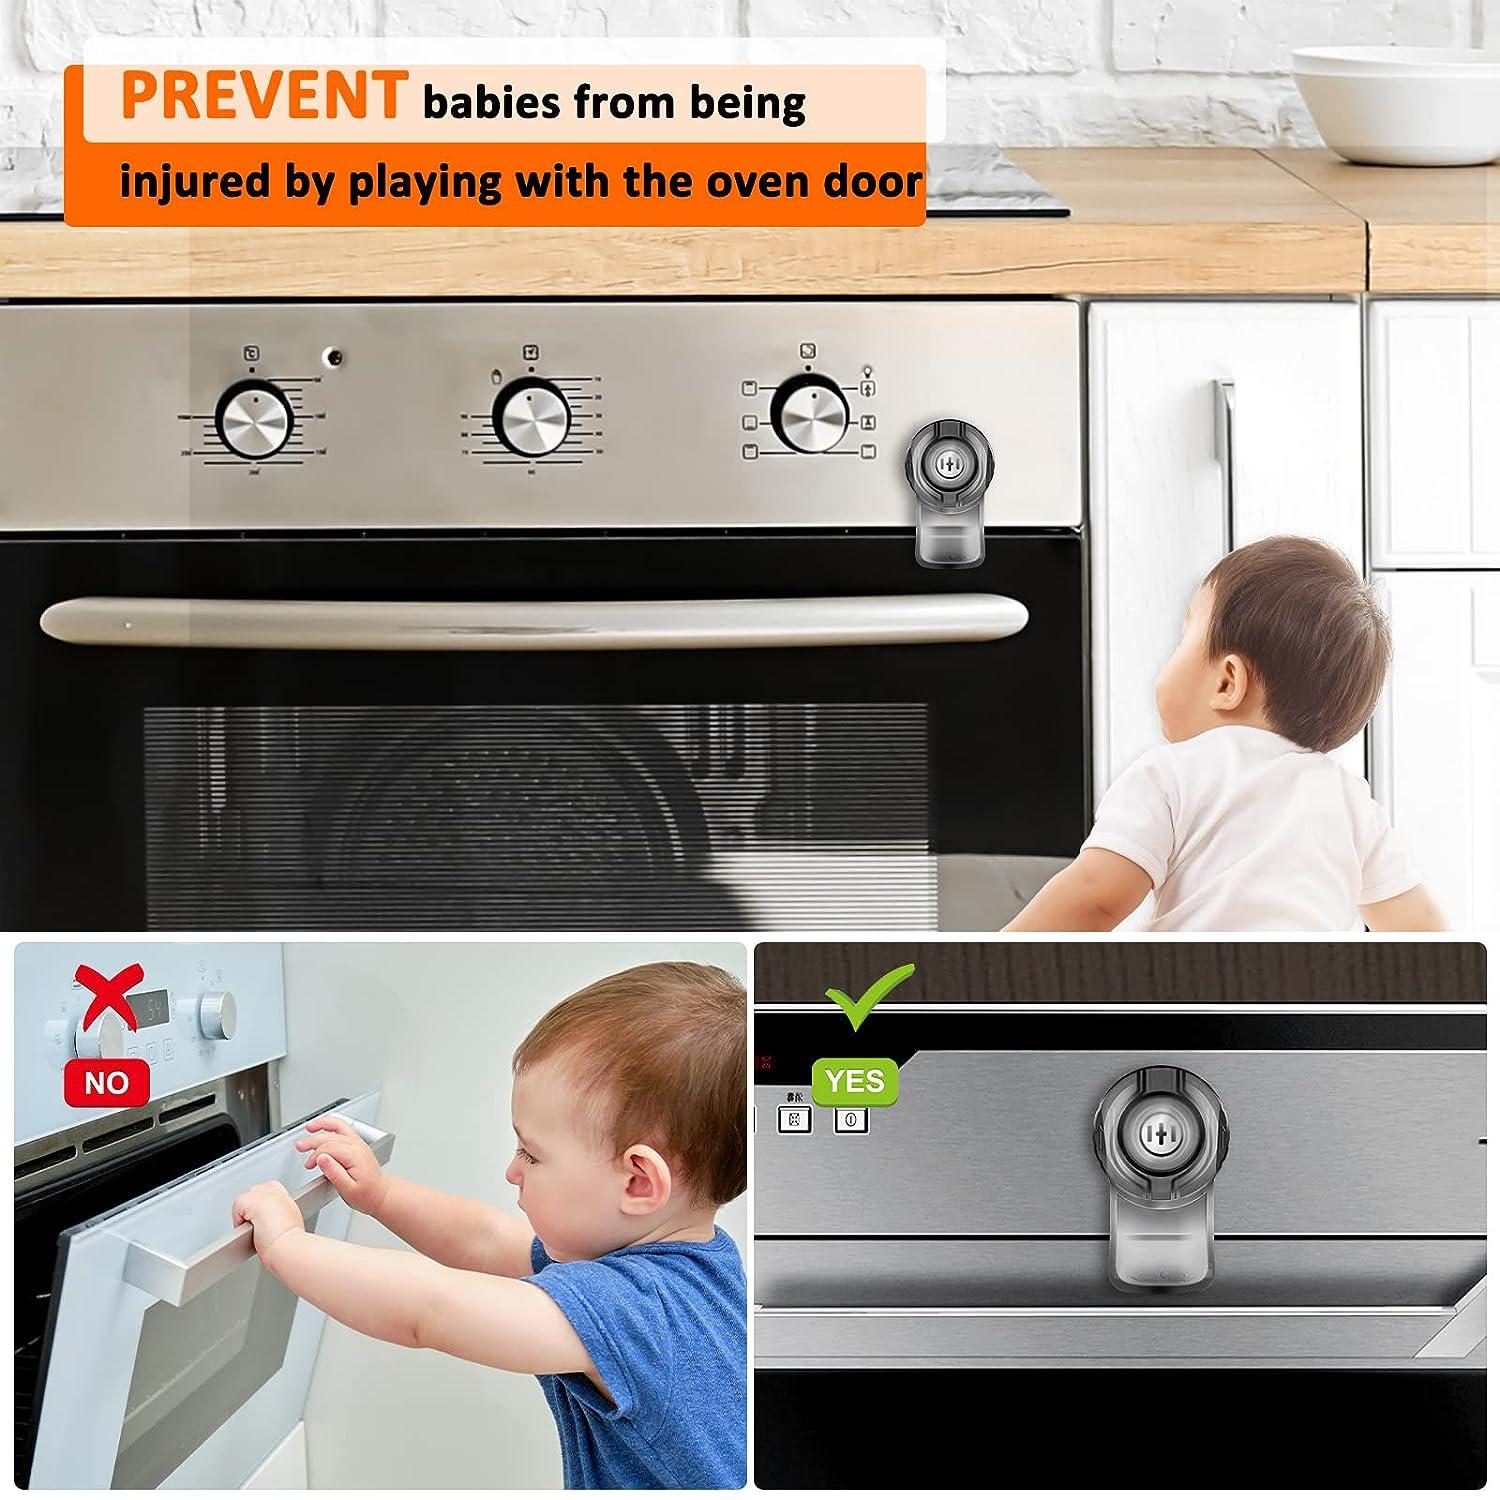 Heart of Tafiti Oven Lock for Child Safety,Heat-Resistant Oven Front Lock  for Kids Easy to Install, Use 3M VHB Adhesive,No Screws or Drill (Black)